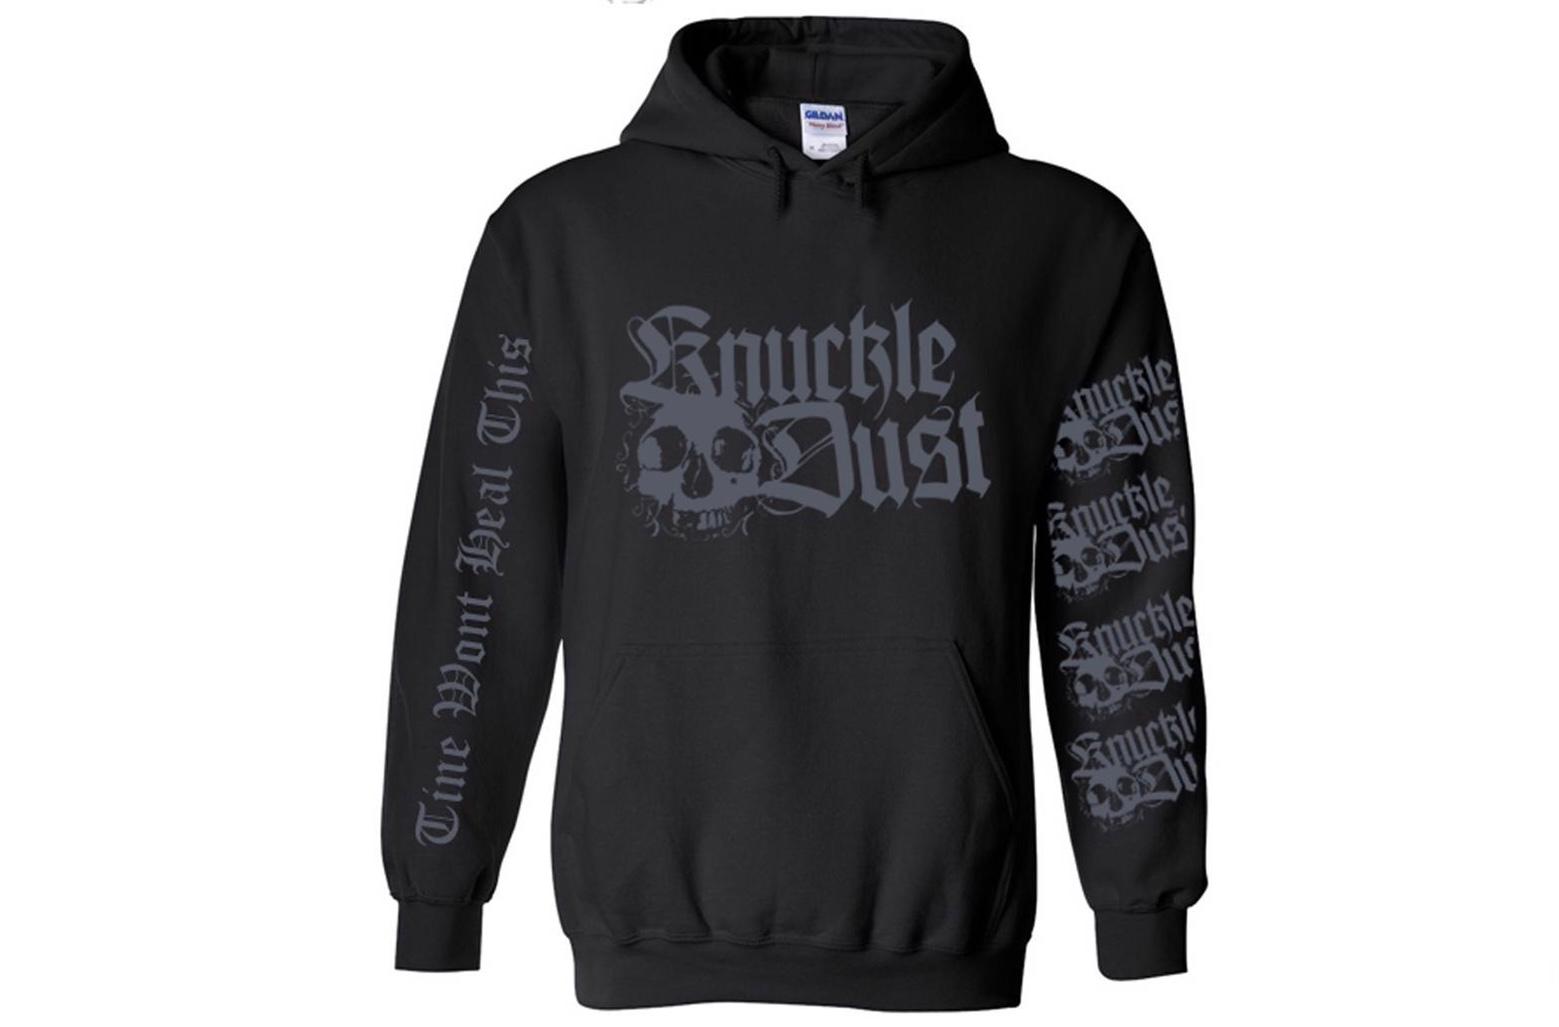 Knuckledust - Time Won’t Heal This Exclusive hoody